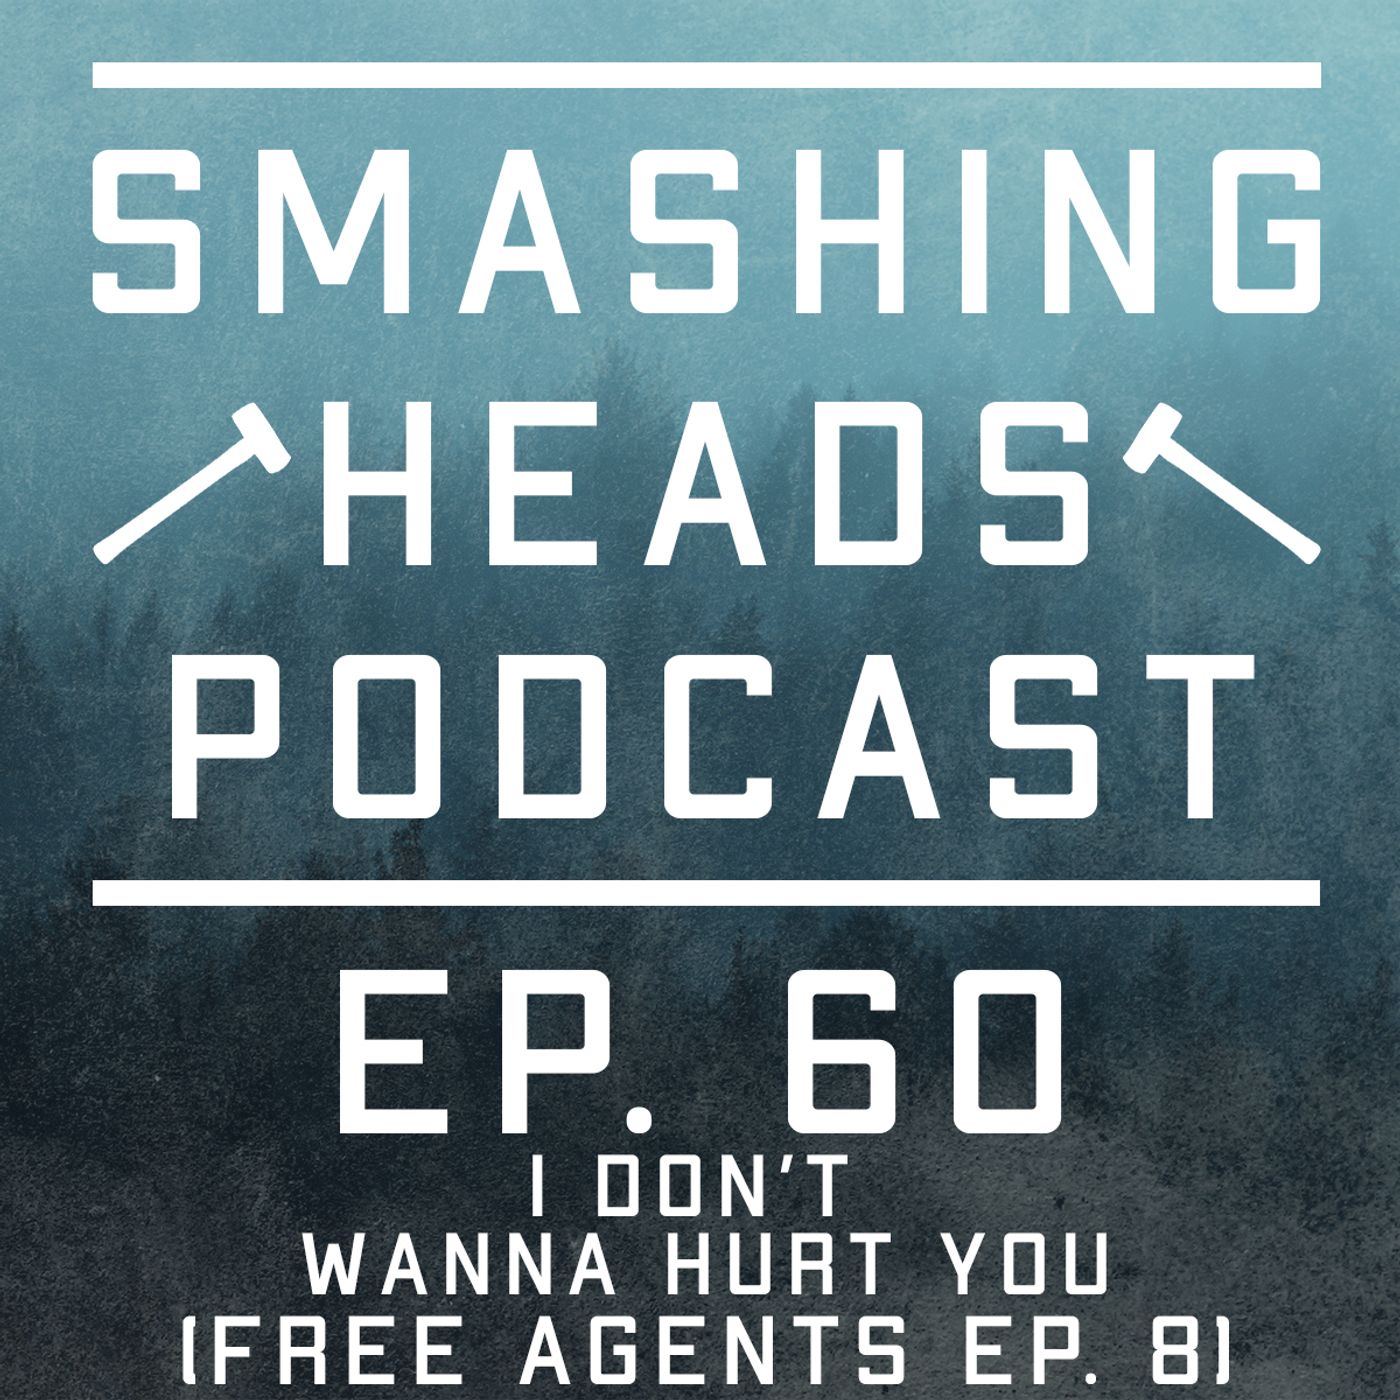 Episode 60: I Don't Wanna Hurt You (Free Agents Ep. 8)